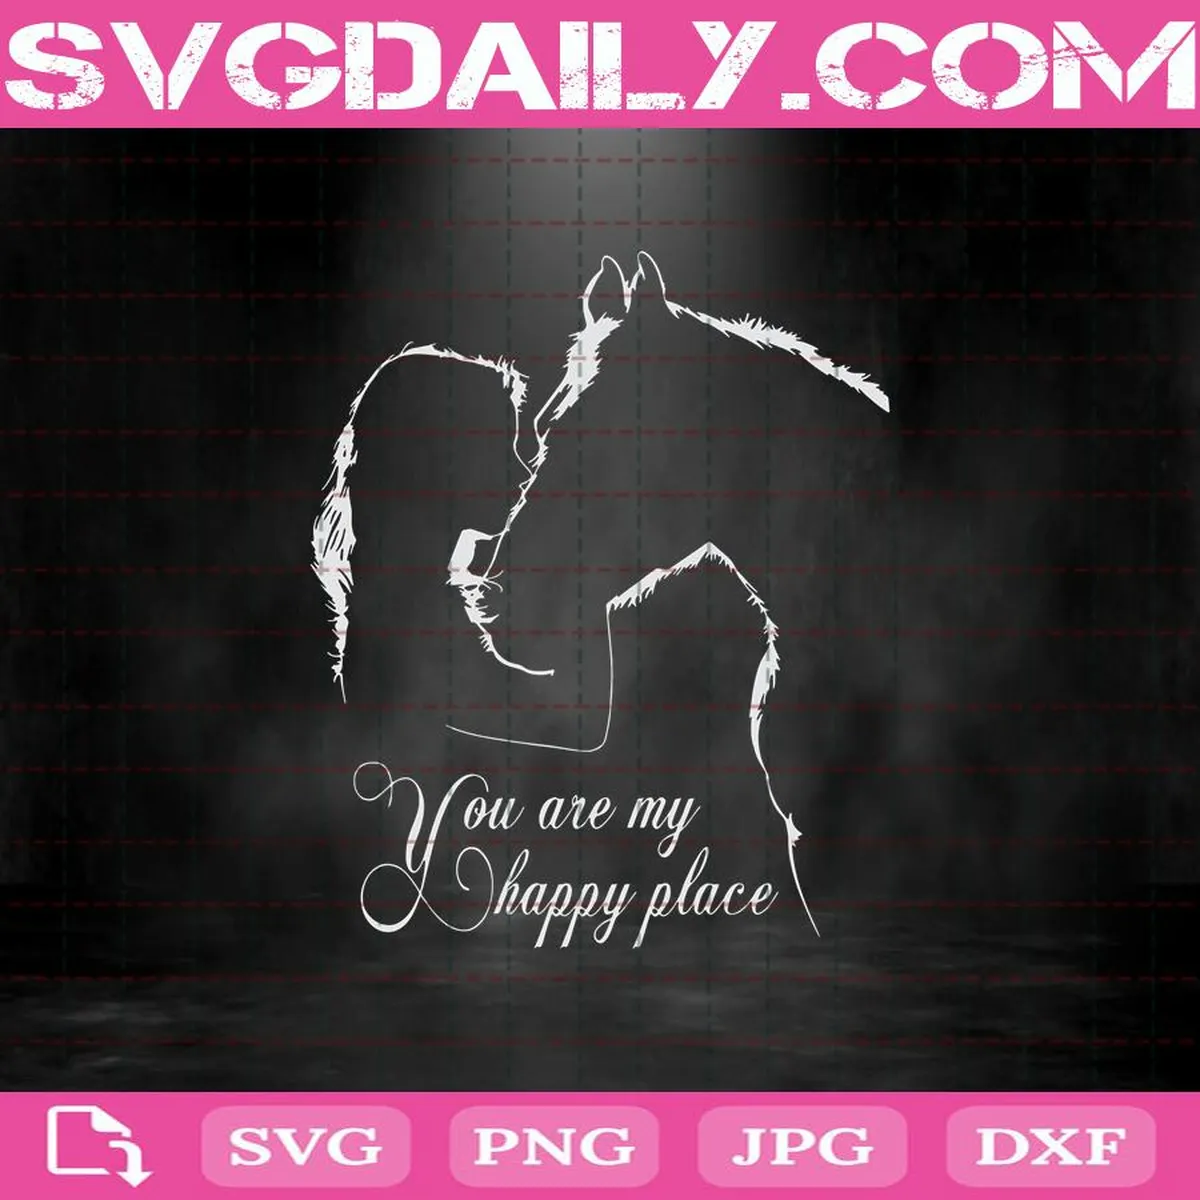 You Are My Happy Place Svg, Womens You Are My Happy Place Svg, Horse Lover Svg, Horse Girl Svg, Horse Gift Svg